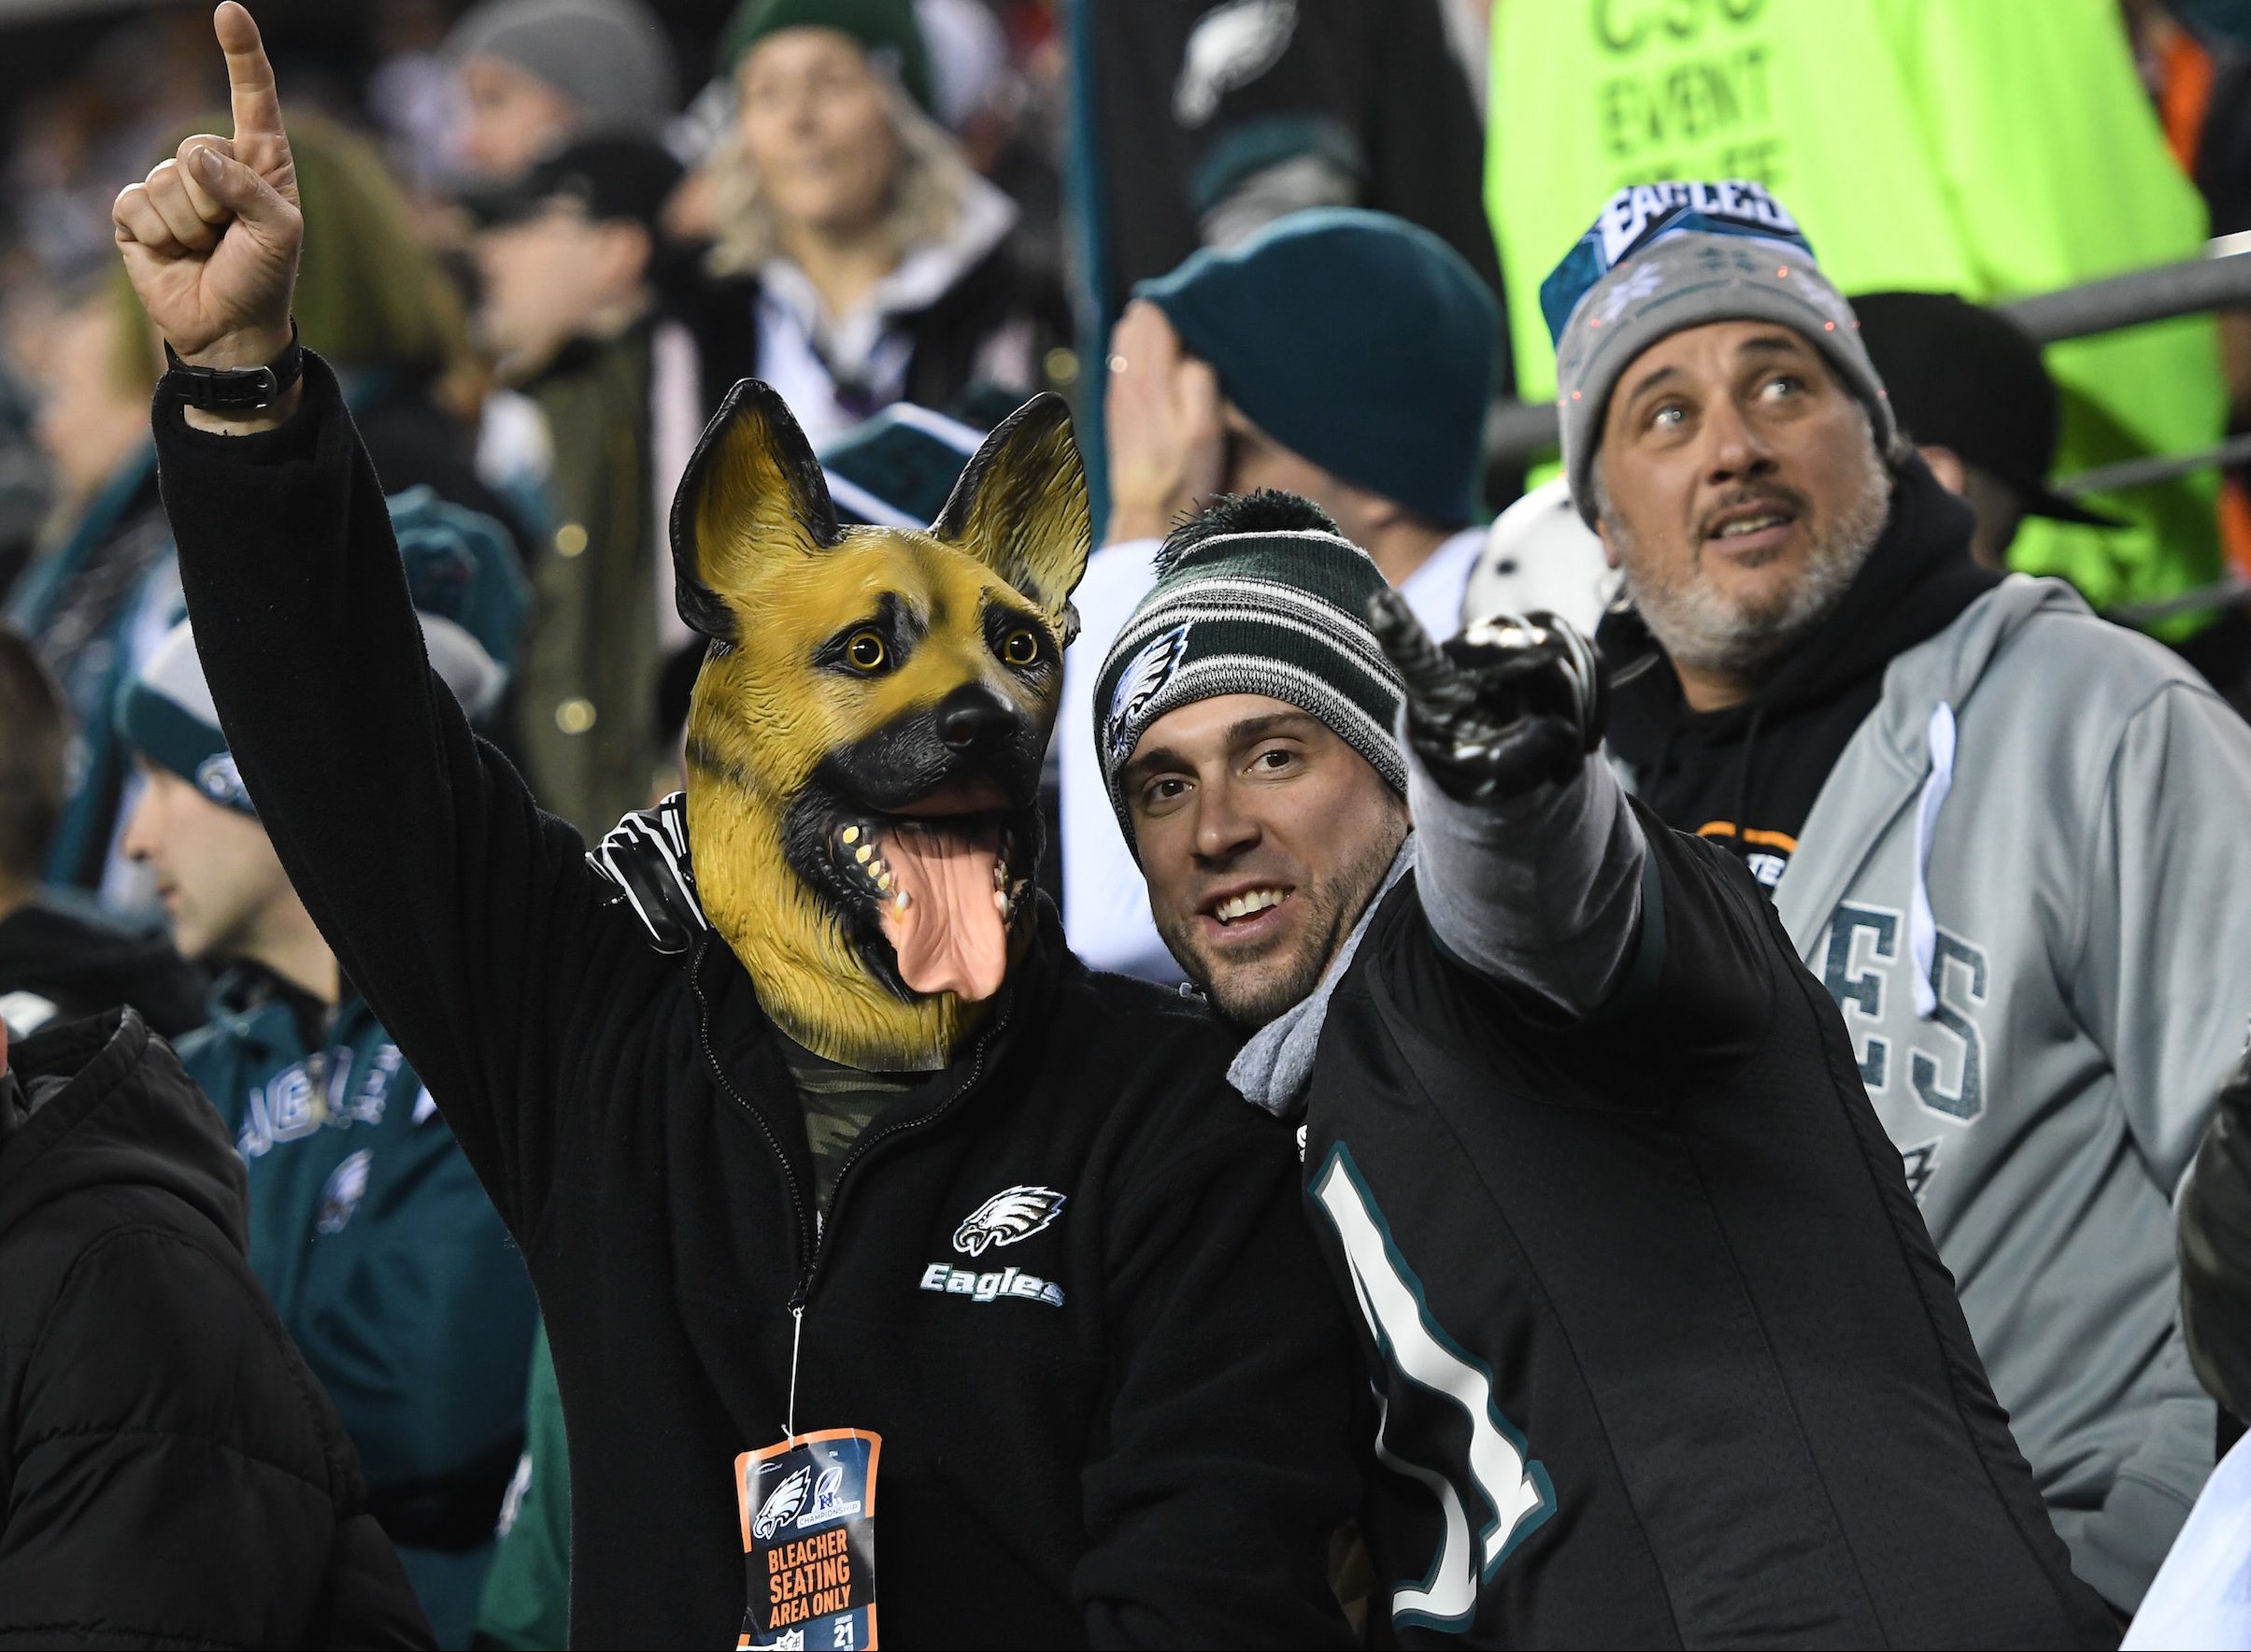 Philadelphia Eagles fans wear underdog mask during the NFC Championship game between the Philadelphia Eagles and the Minnesota Vikings on January 21, 2017 at Lincoln Financial Field in Philadelphia, PA. Eagles won 38-7.(Photo by Andy Lewis/Icon Sportswire via Getty Images)